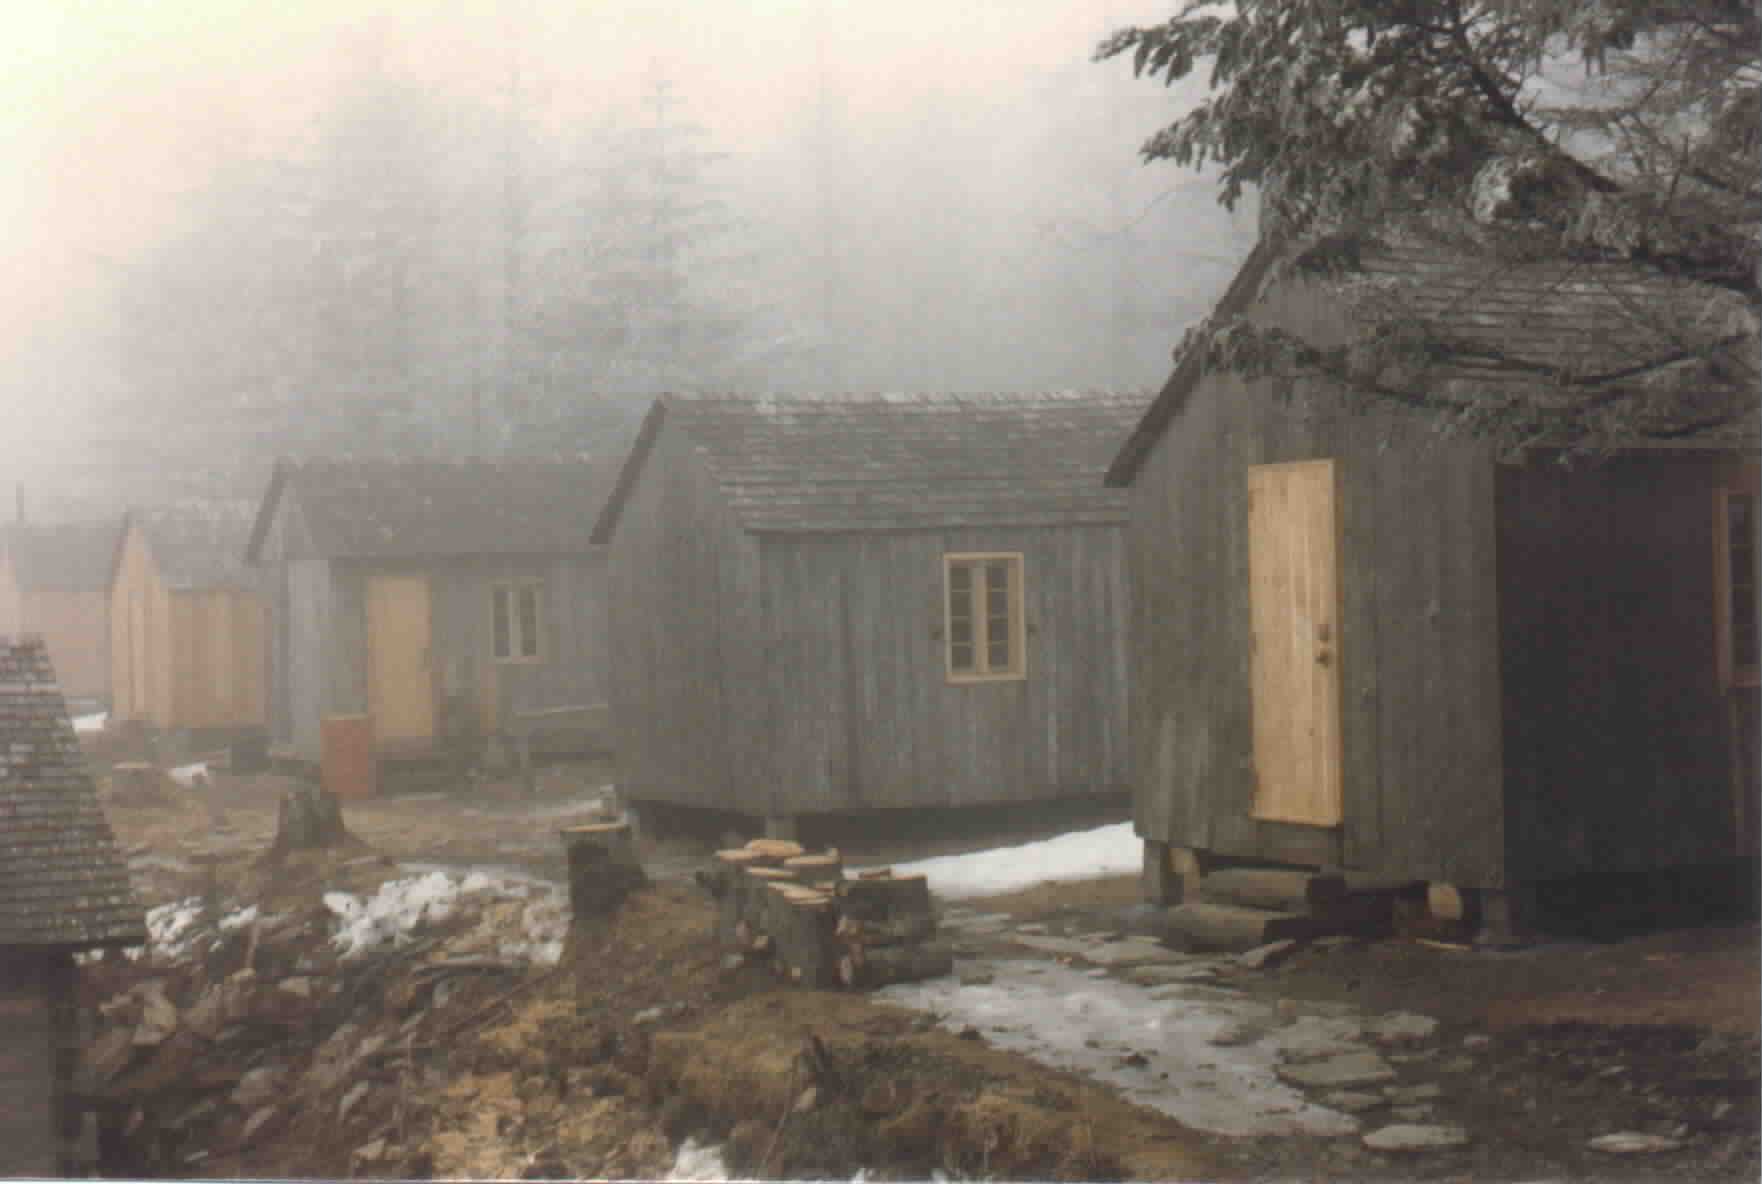 Cabins at LeConte